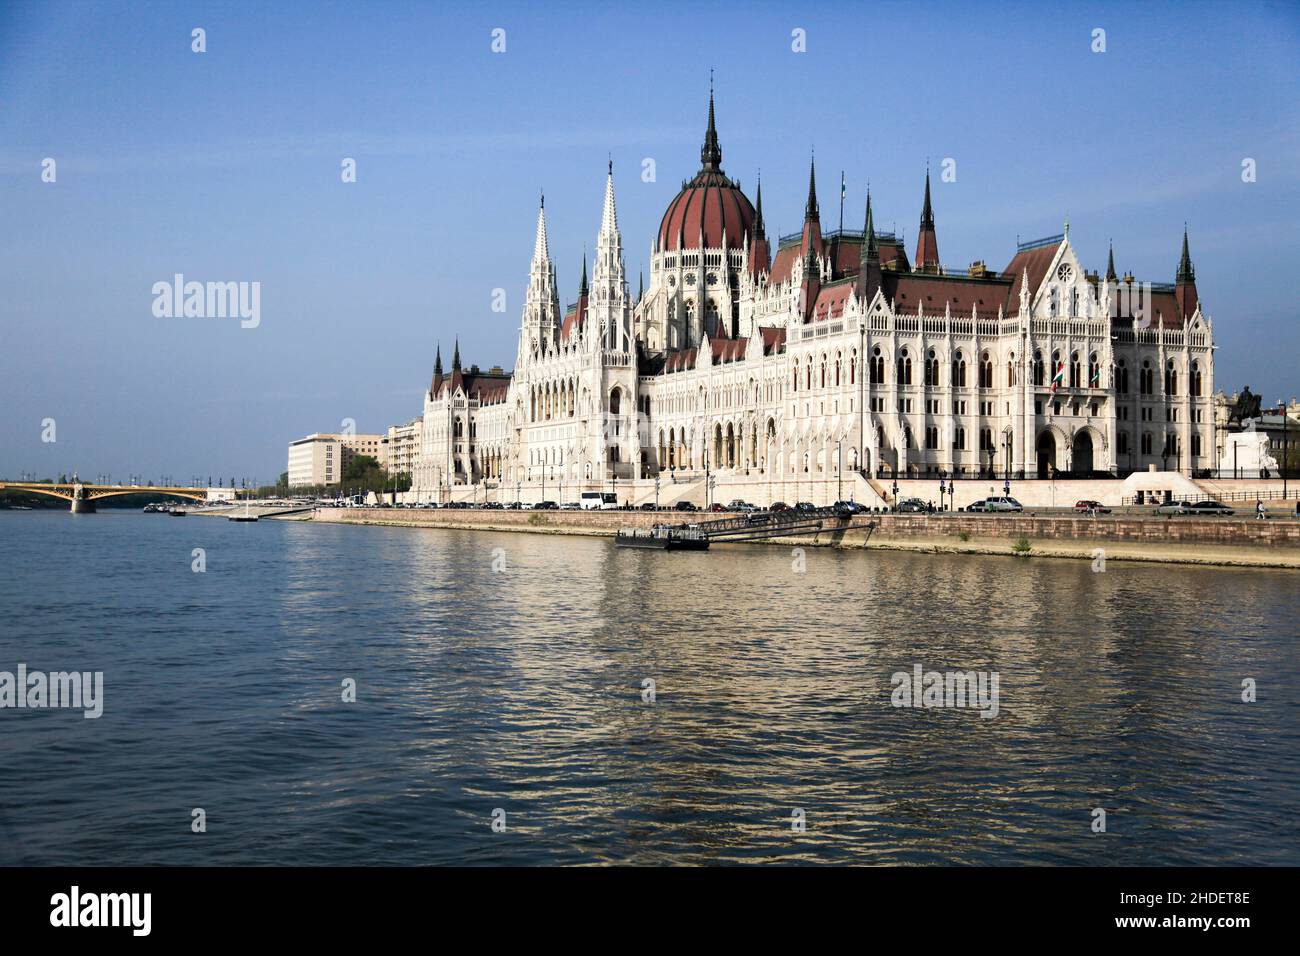 Eastern Europe, Hungary, Budapest, Parliament Building as seen from the Danube river Stock Photo